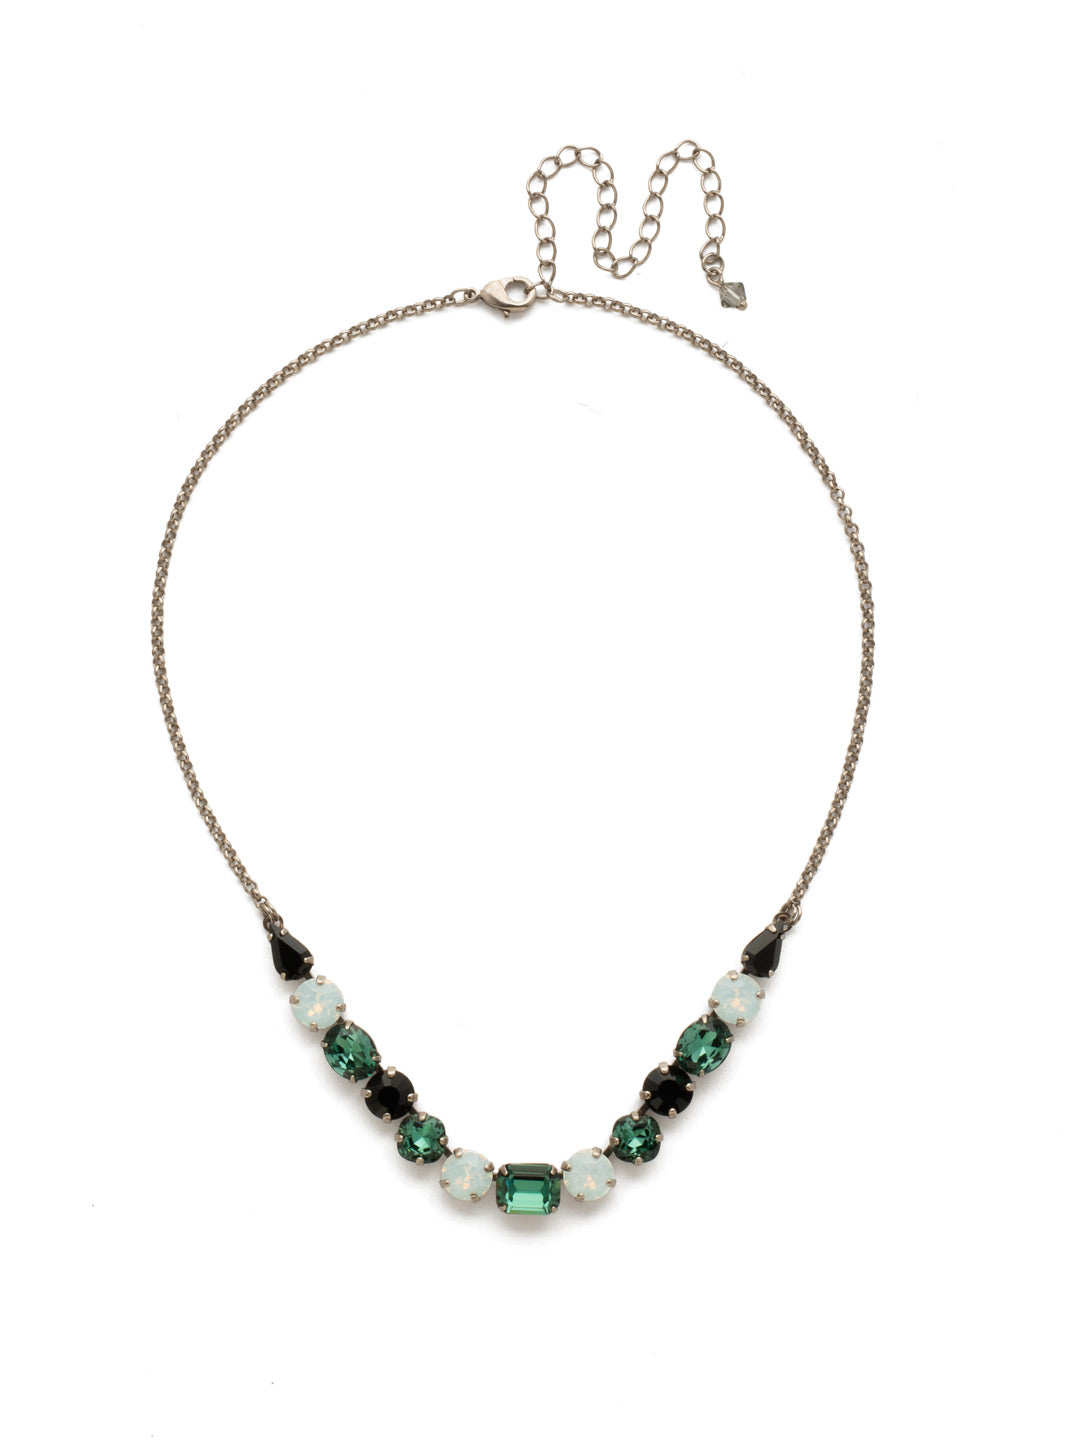 Tansy Half Line Tennis Necklace - NDQ14ASGDG - Oval, round, emerald, pear and cushion cut crystals are accented by a delicate chain for subtle sparkle that looks great layered or worn solo. From Sorrelli's Game Day Green collection in our Antique Silver-tone finish.